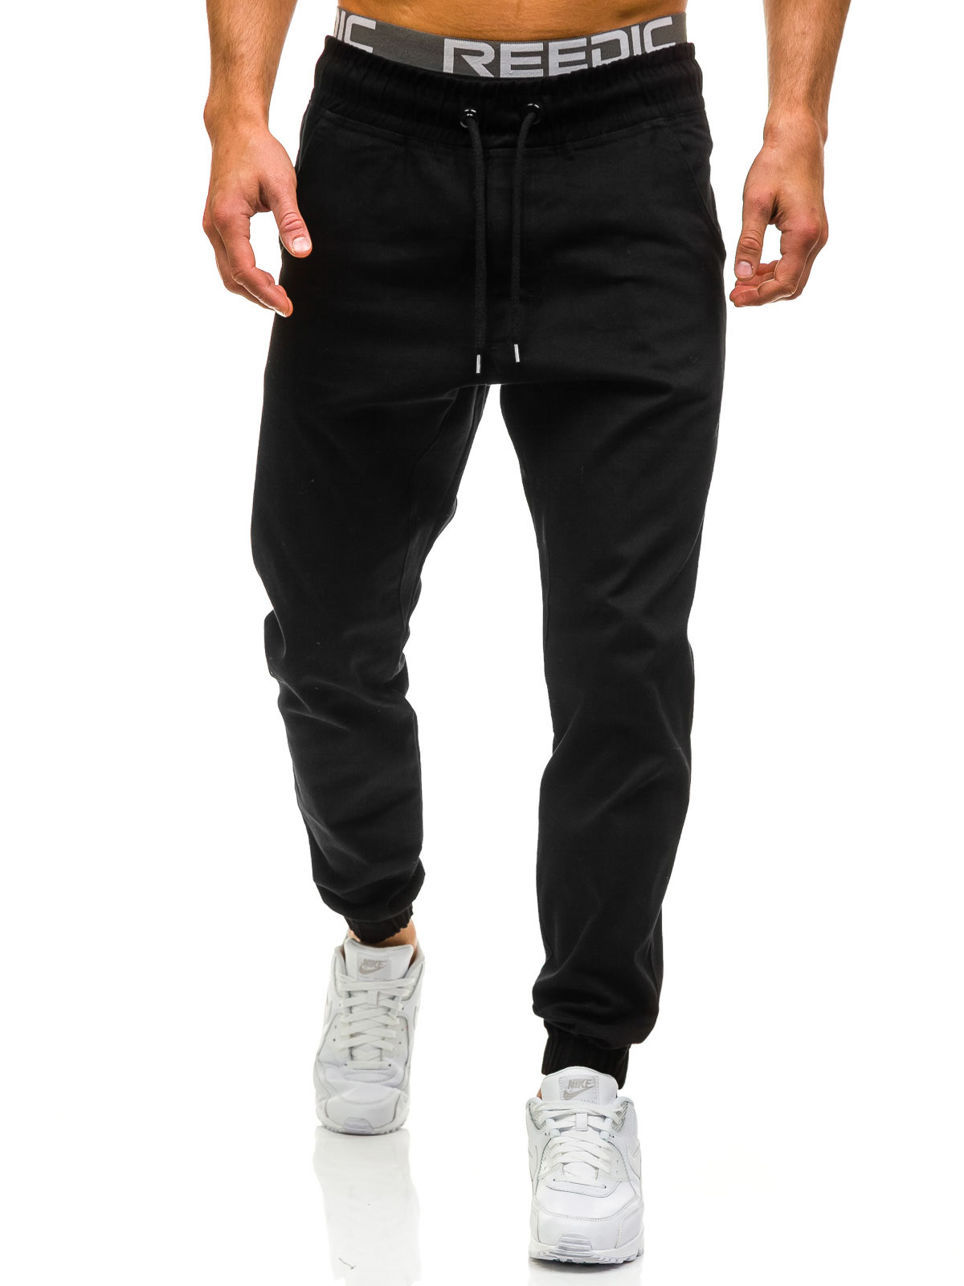 YINGLAILAI Men's Autumn Classic-Fit Modal Joggers Stretch Casual Slim Fit  Flat Front Comfort Pants with Zipper Pockets,Black,M at  Men's  Clothing store